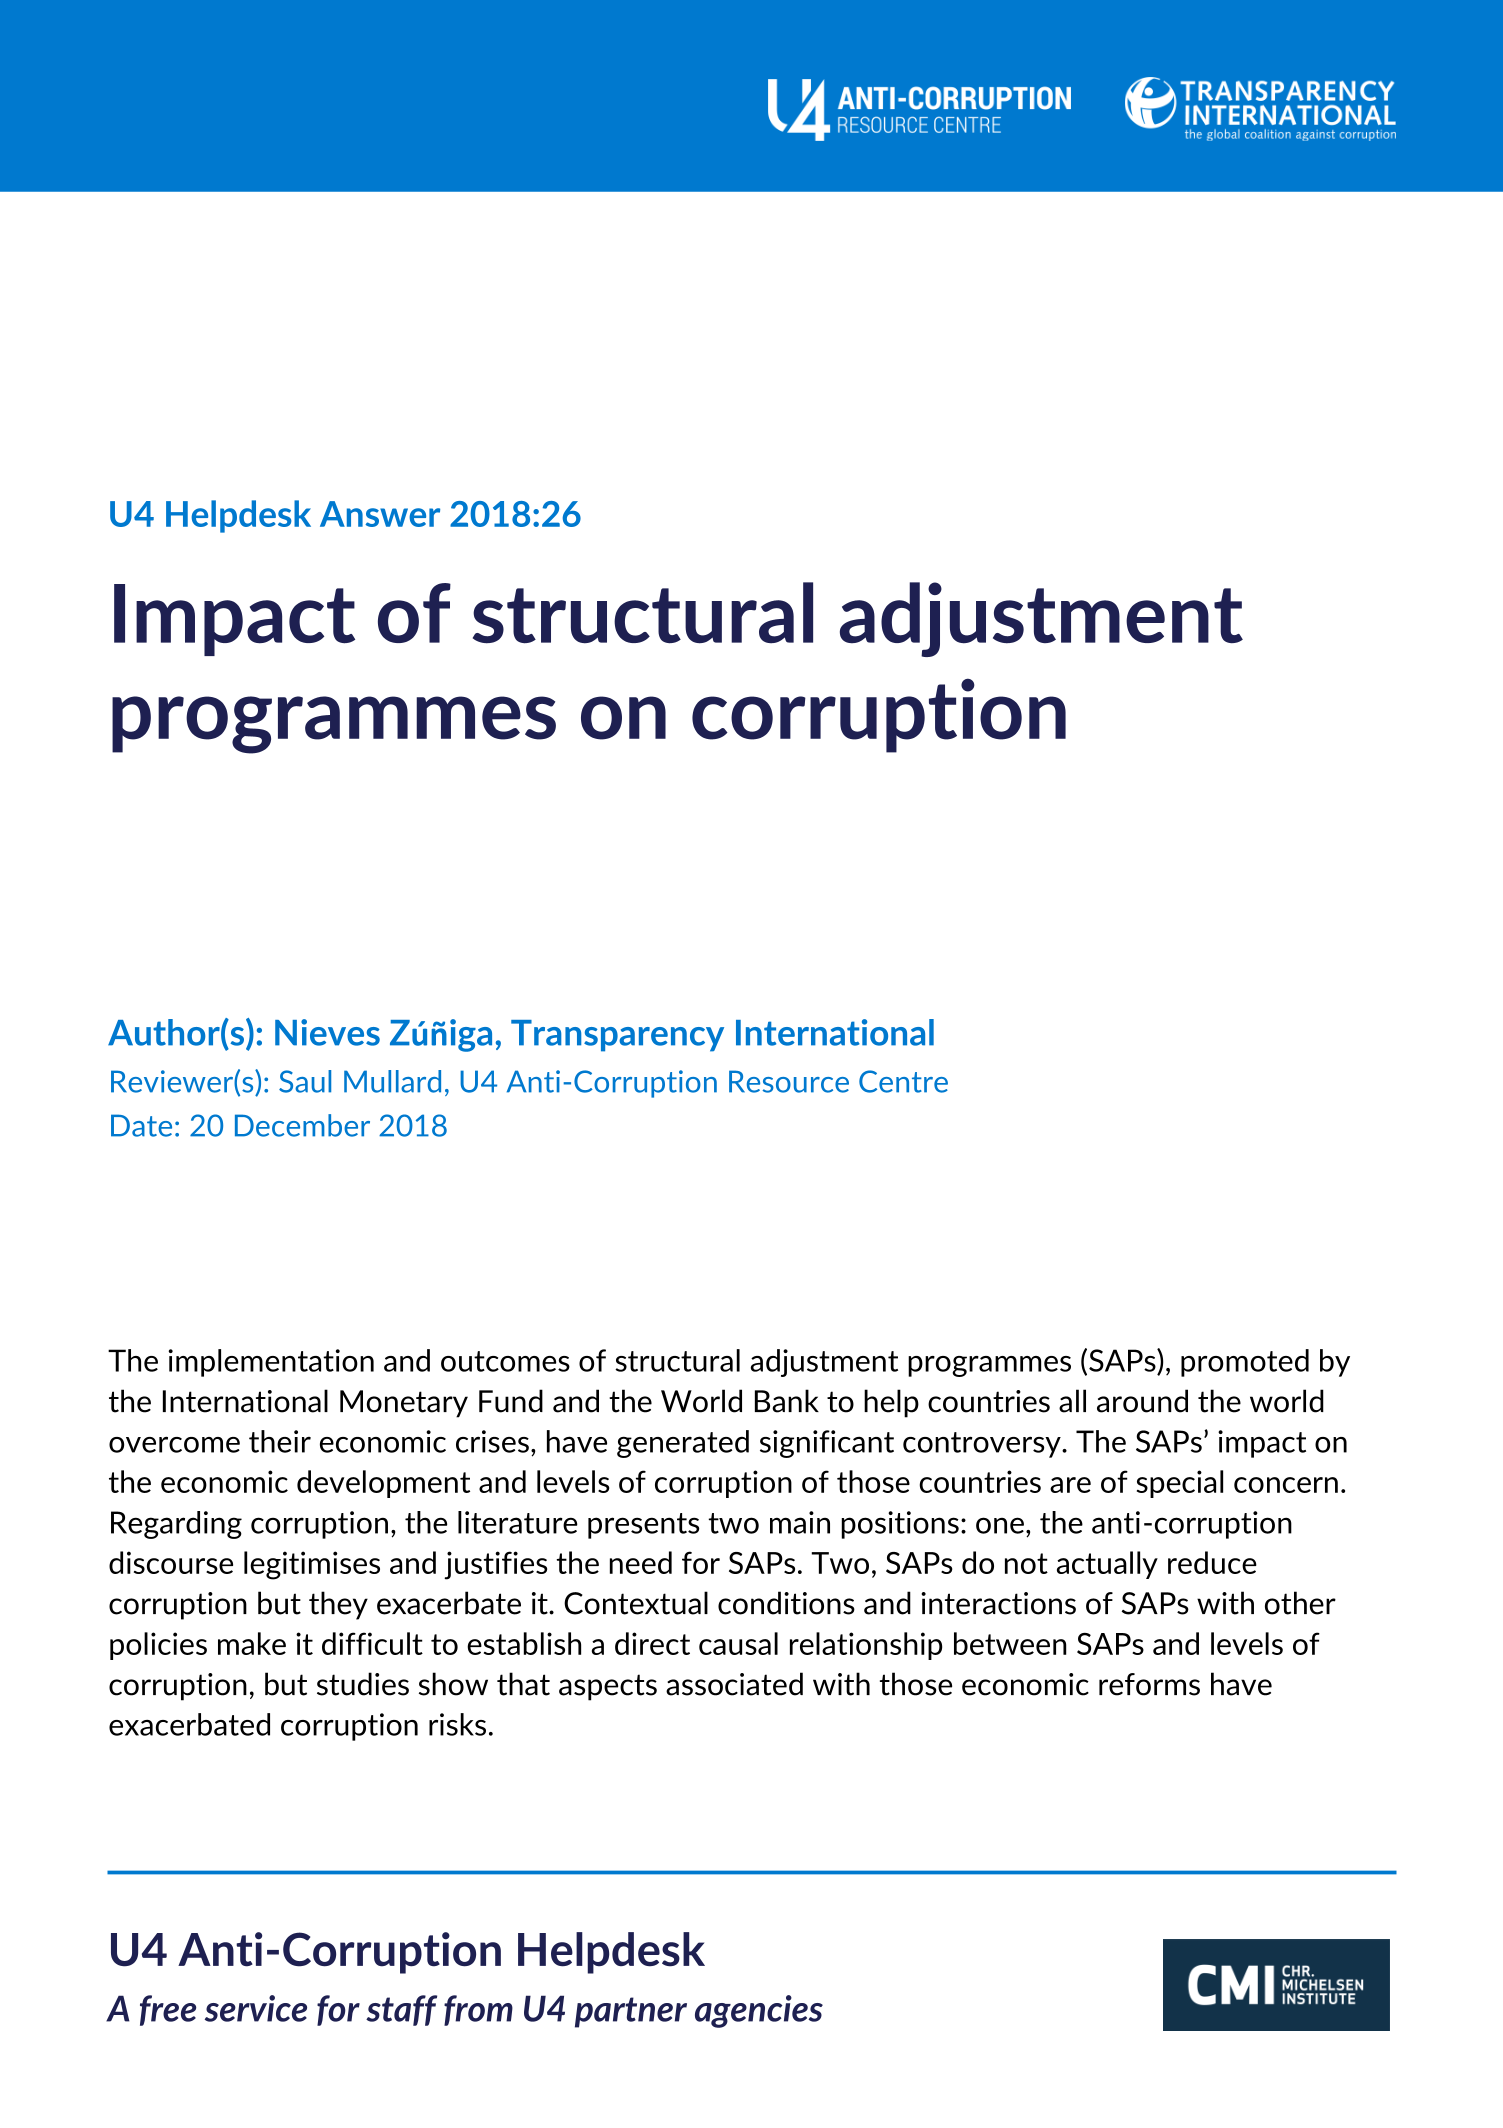 Impact of structural adjustment programmes on corruption